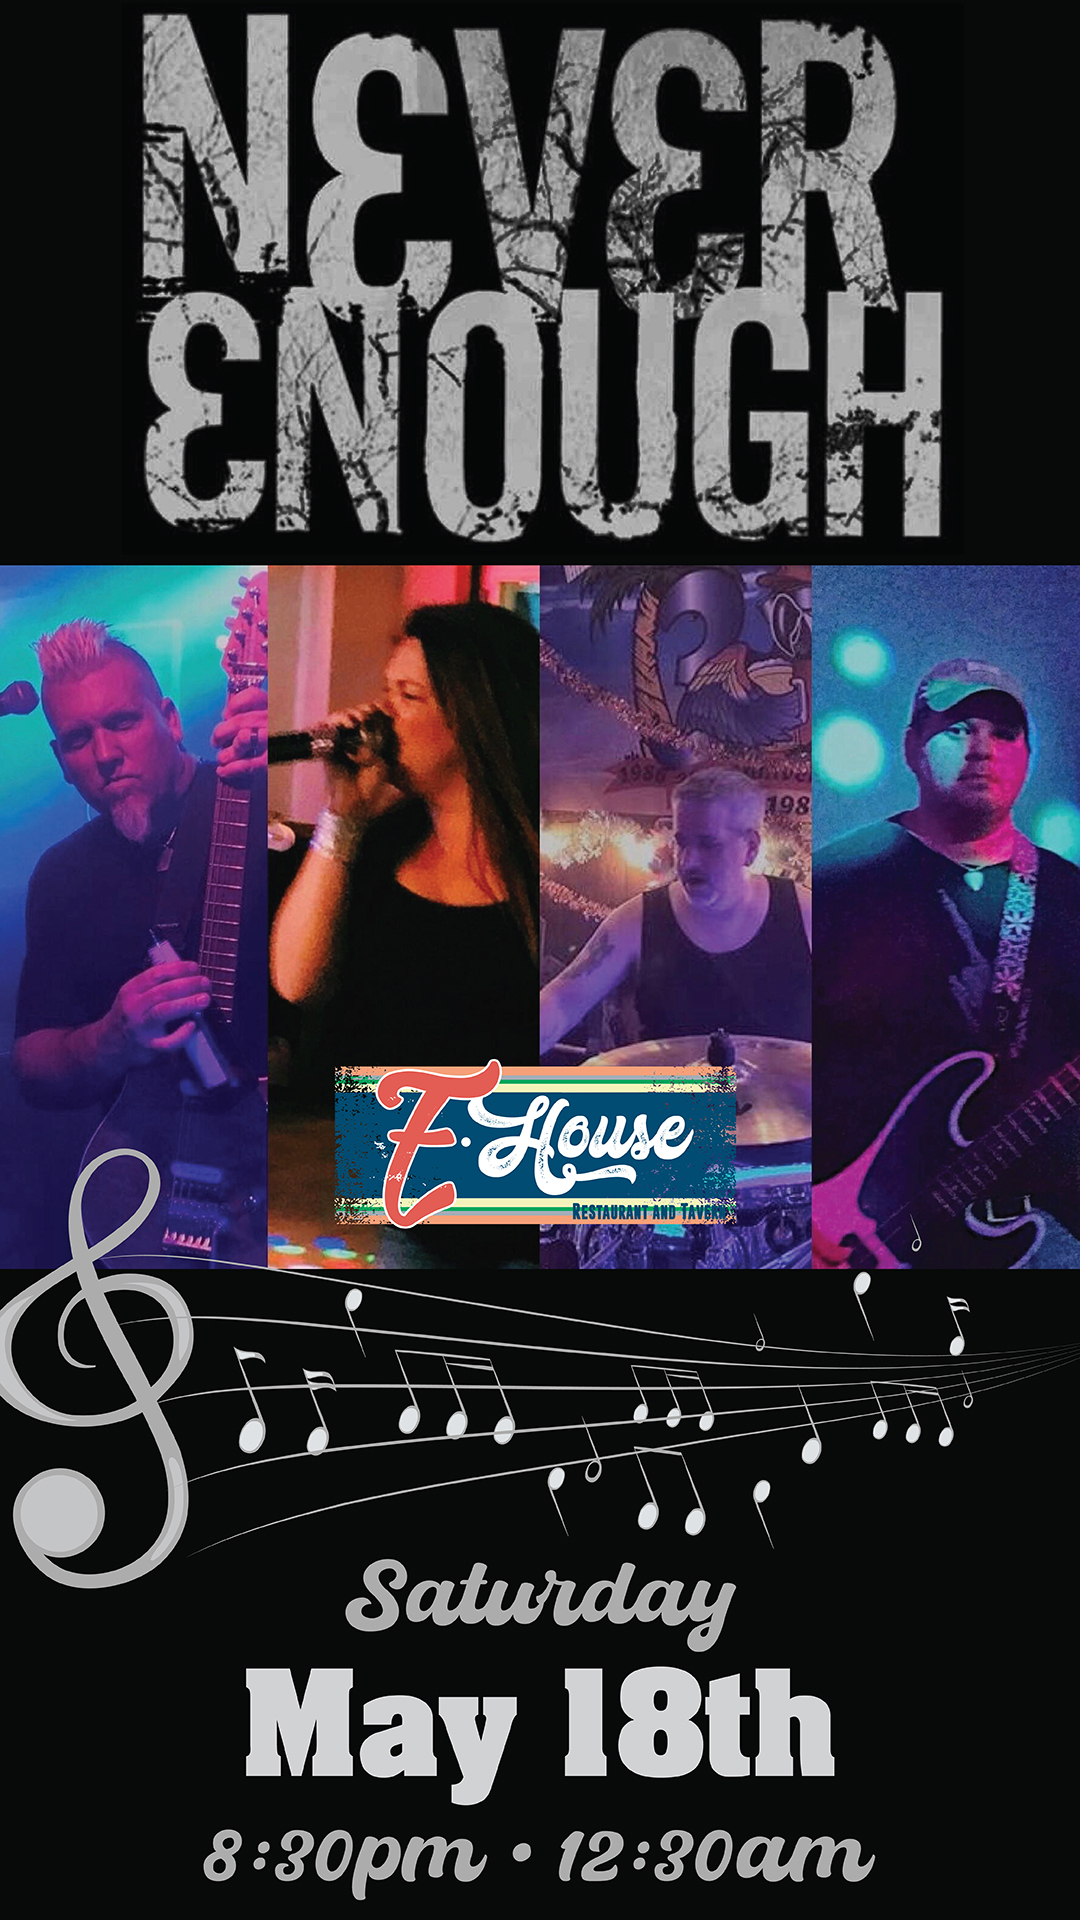 Promotional poster for a live music event featuring the band "never enough" at e-house on saturday, 18th, from 8:30 pm to 12:30 am, with images of band members performing.